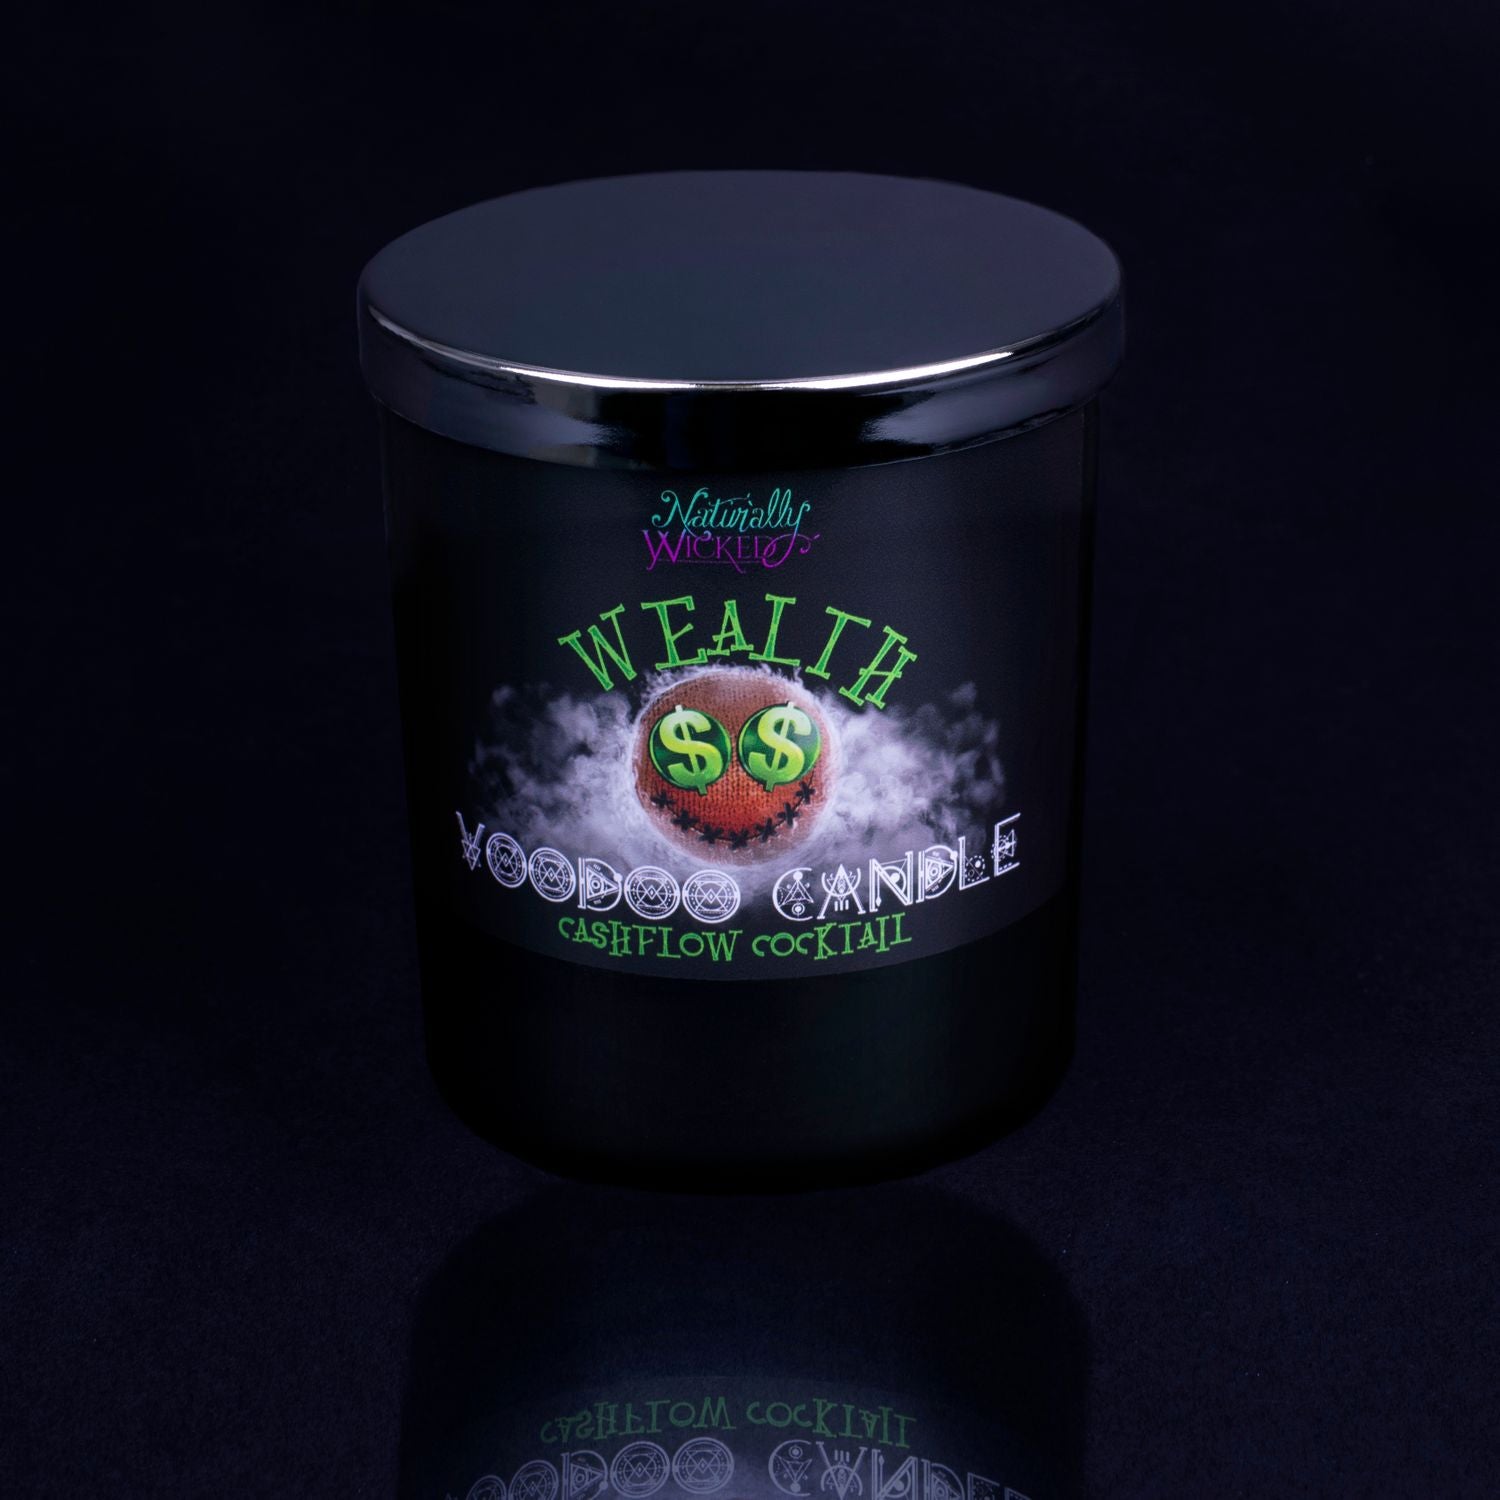 Naturally Wicked Voodoo Wealth Spell Candle With Mirror Finished Exquisite Lid In Place. Featuring A Black Gloss Label, A Voodoo Doll Design And Cashflow Cocktail Scent.